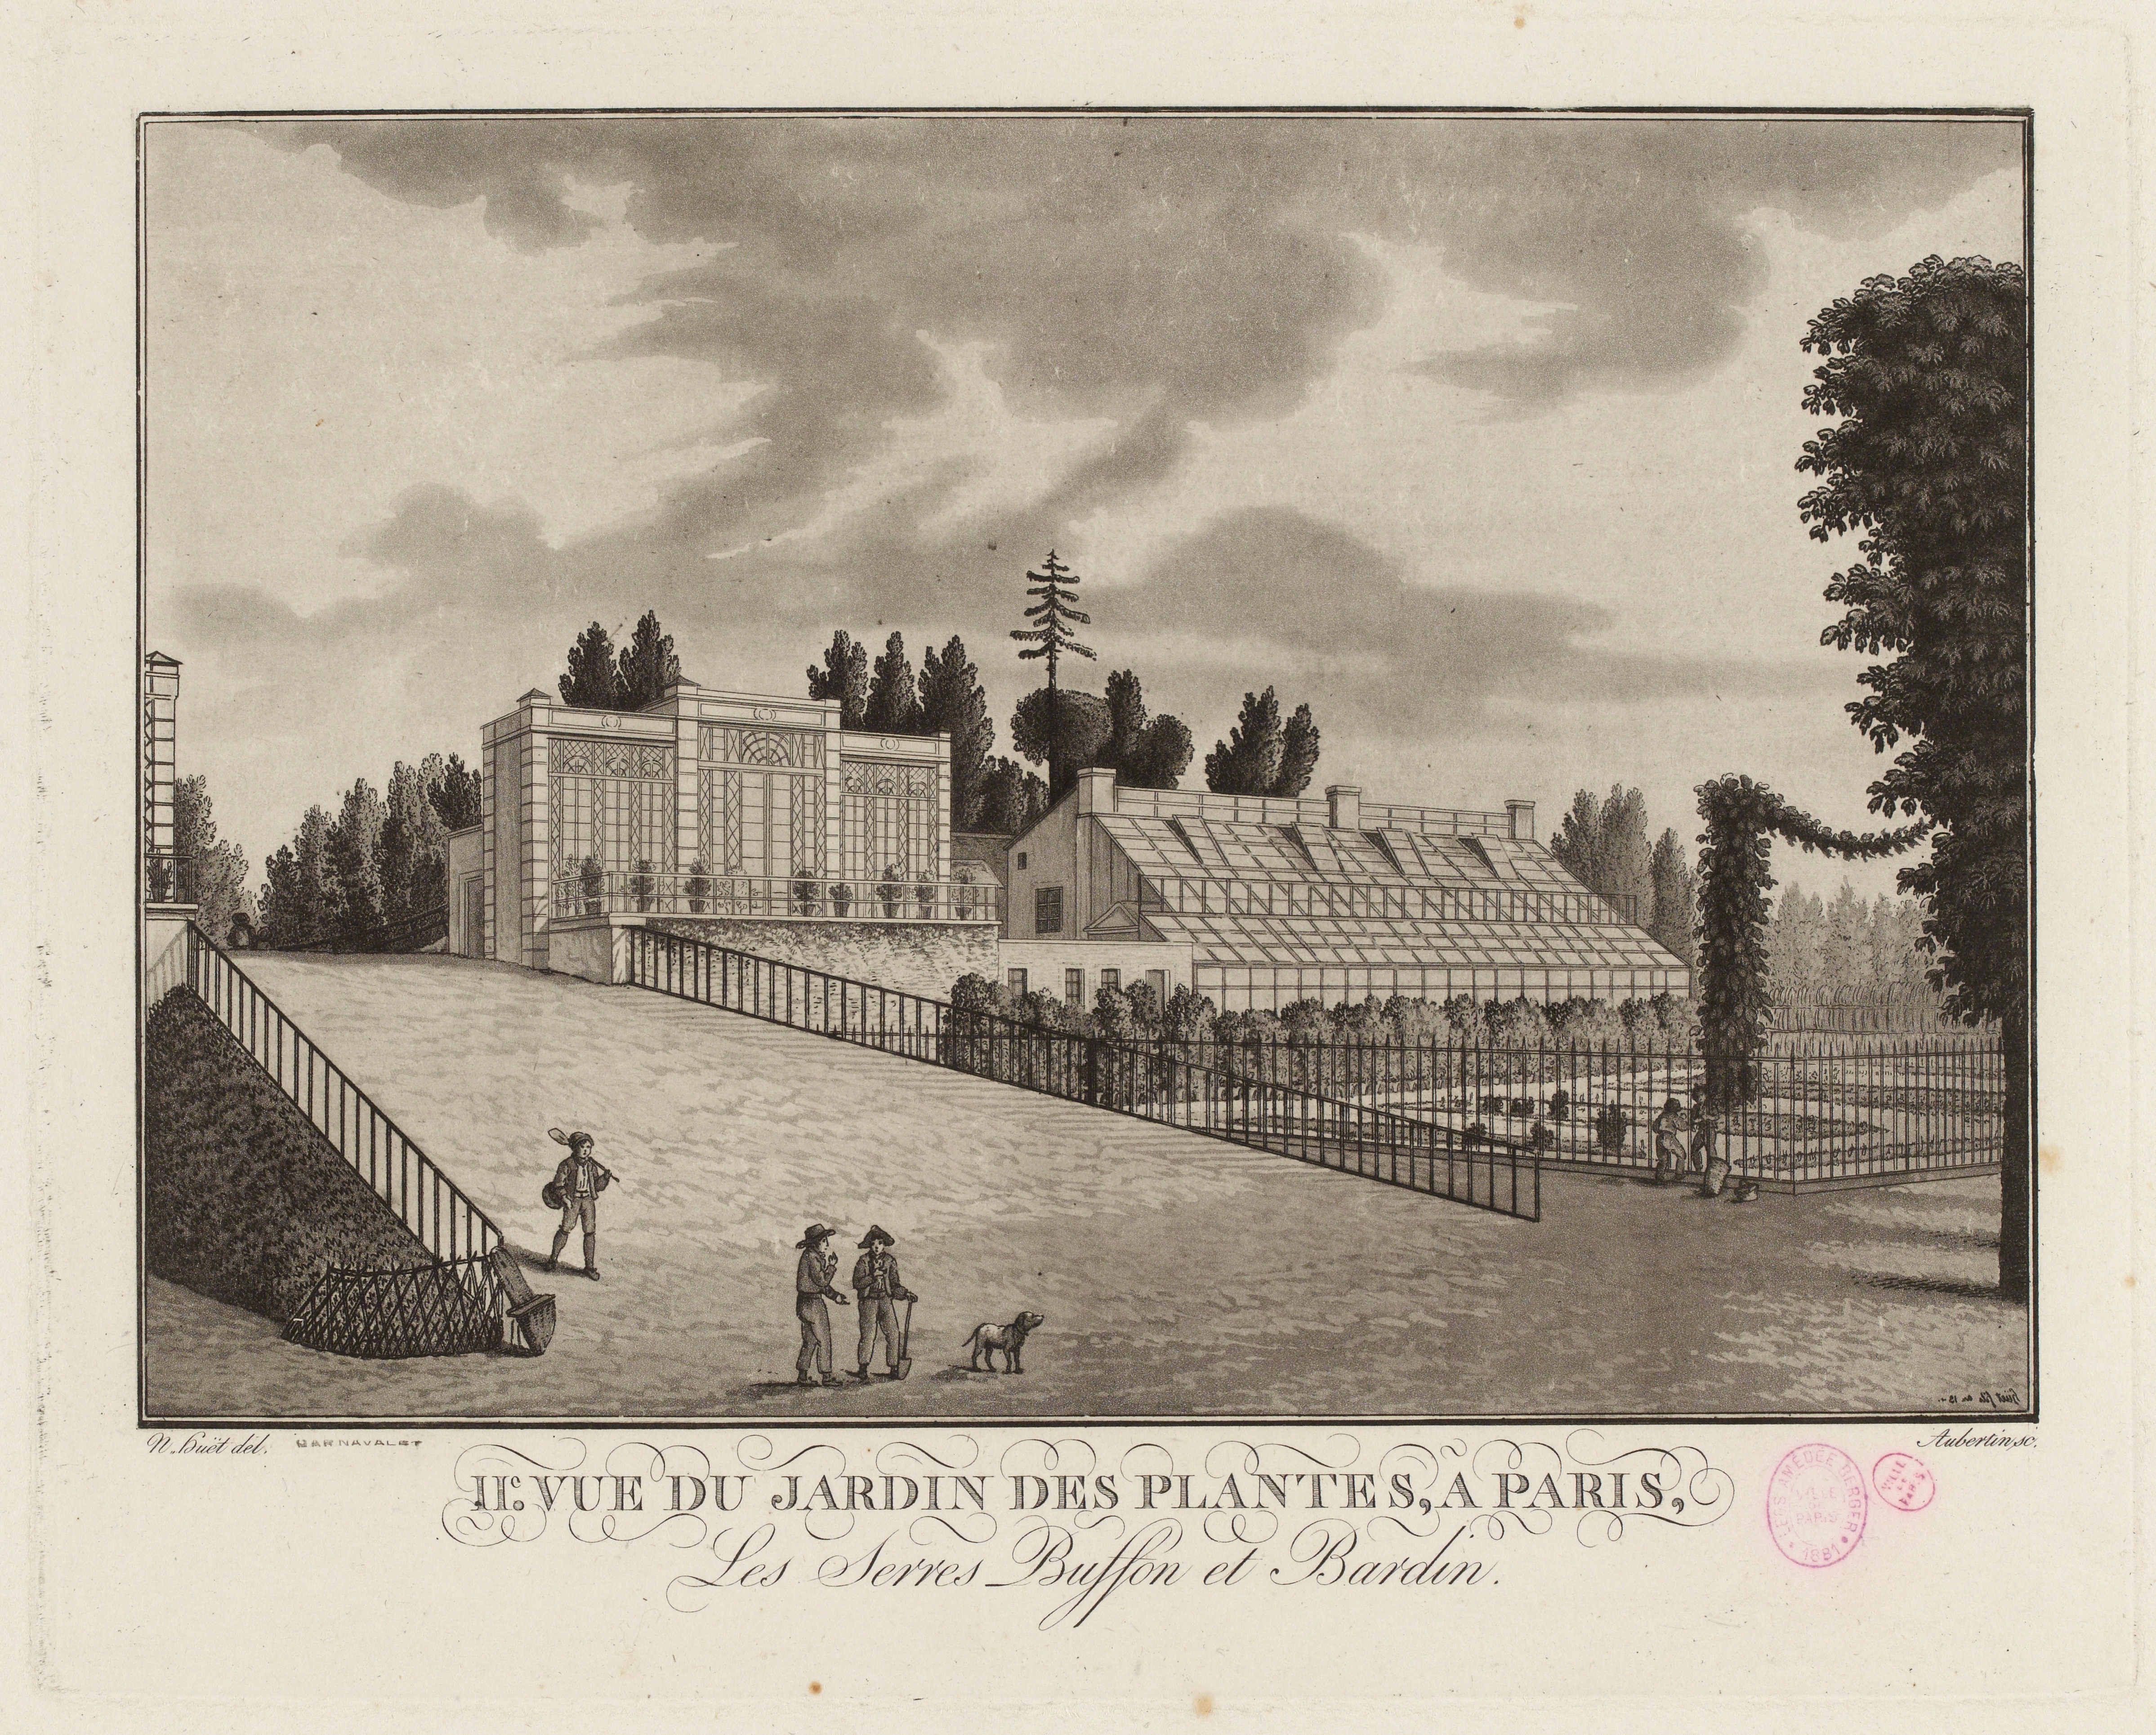 Engraving featuring two greenhouses and a couple people strolling the grounds of the garden.